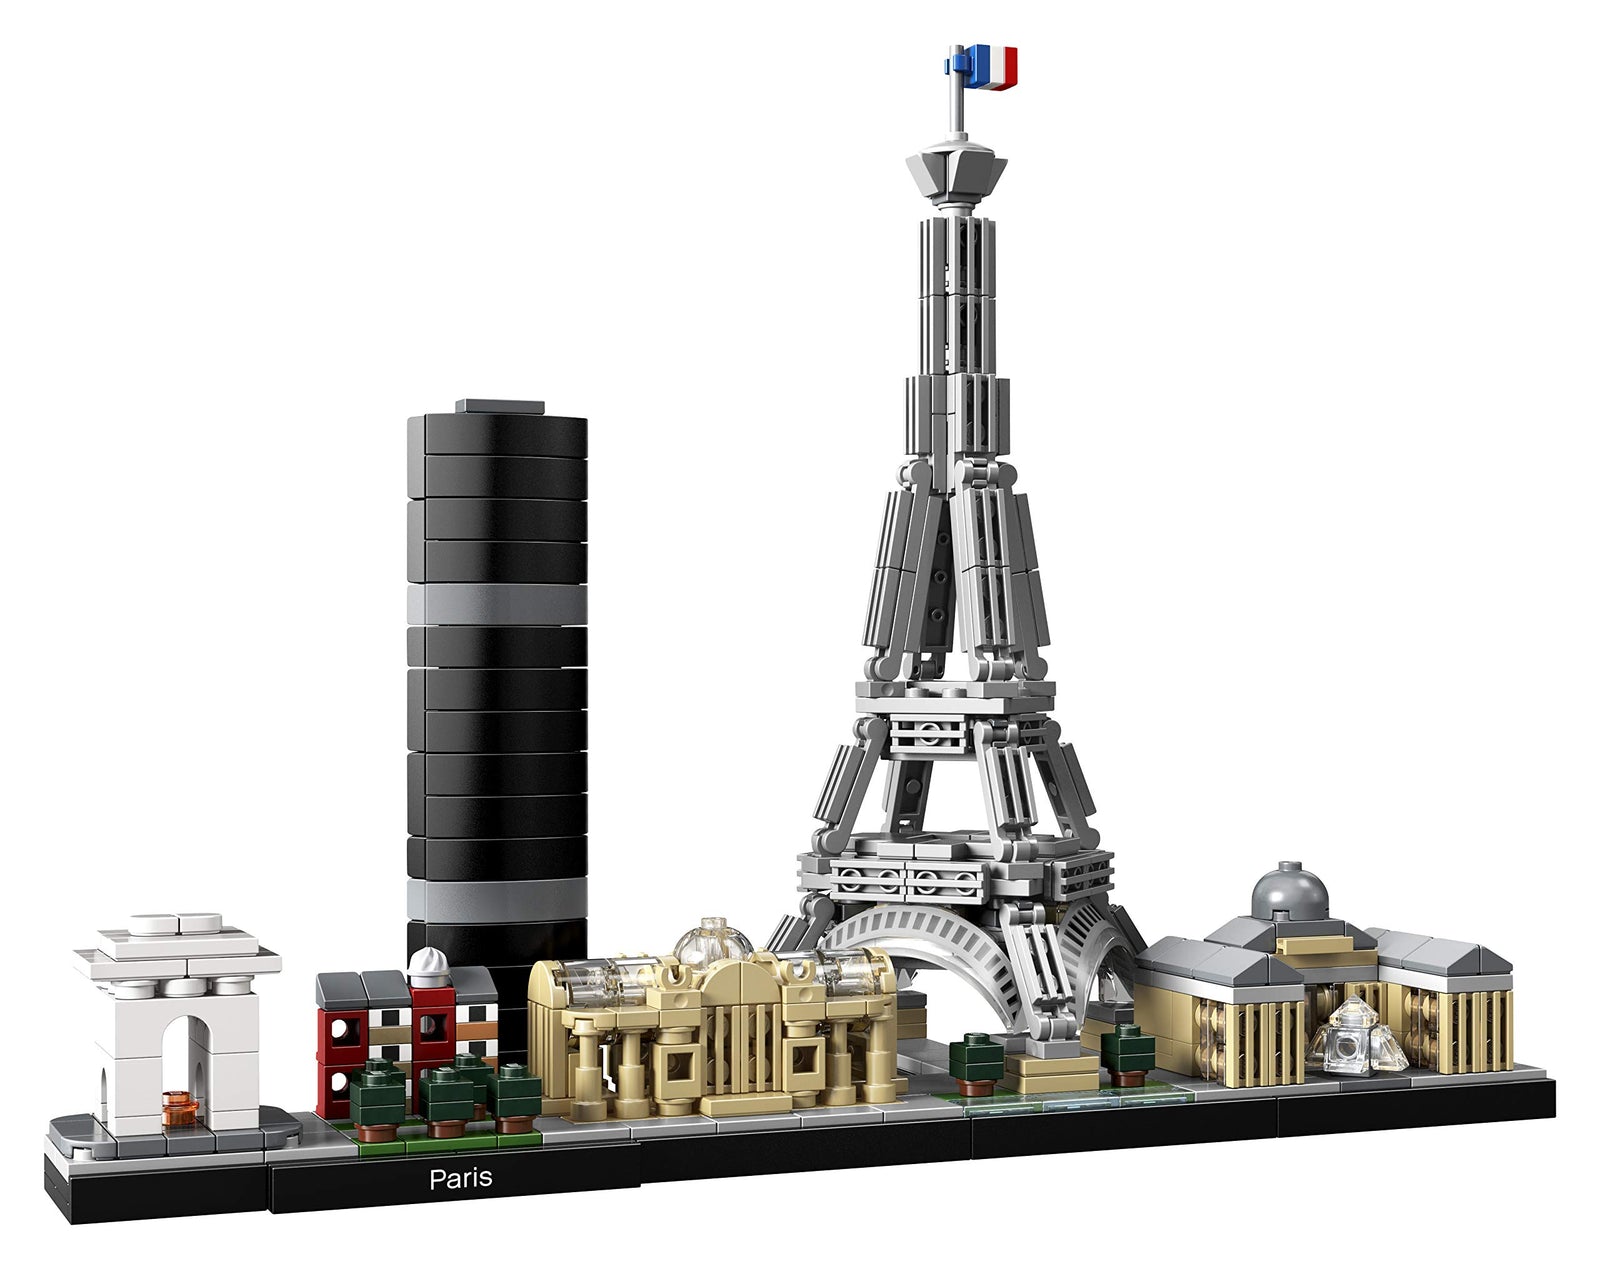 LEGO Architecture Skyline Collection 21044 Paris Skyline Building Kit with Eiffel Tower Model and Other Paris City Architecture for Build and Display (649 Pieces)